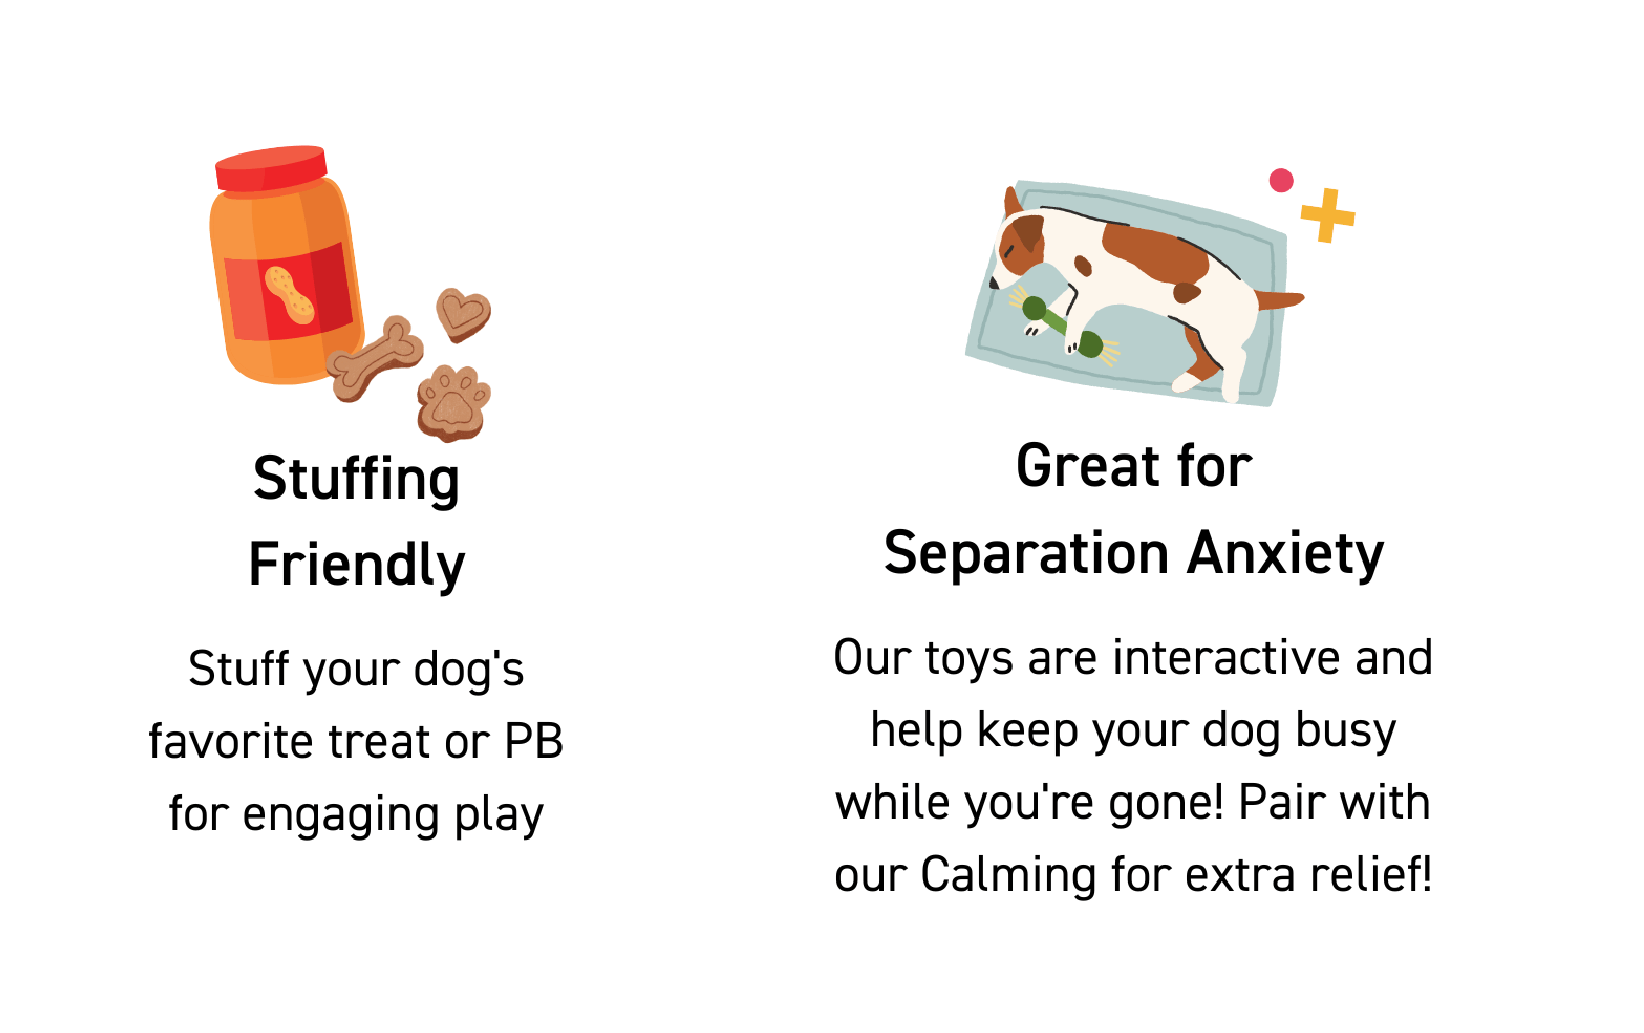 Keep Your Dog Busy, with a Twist!